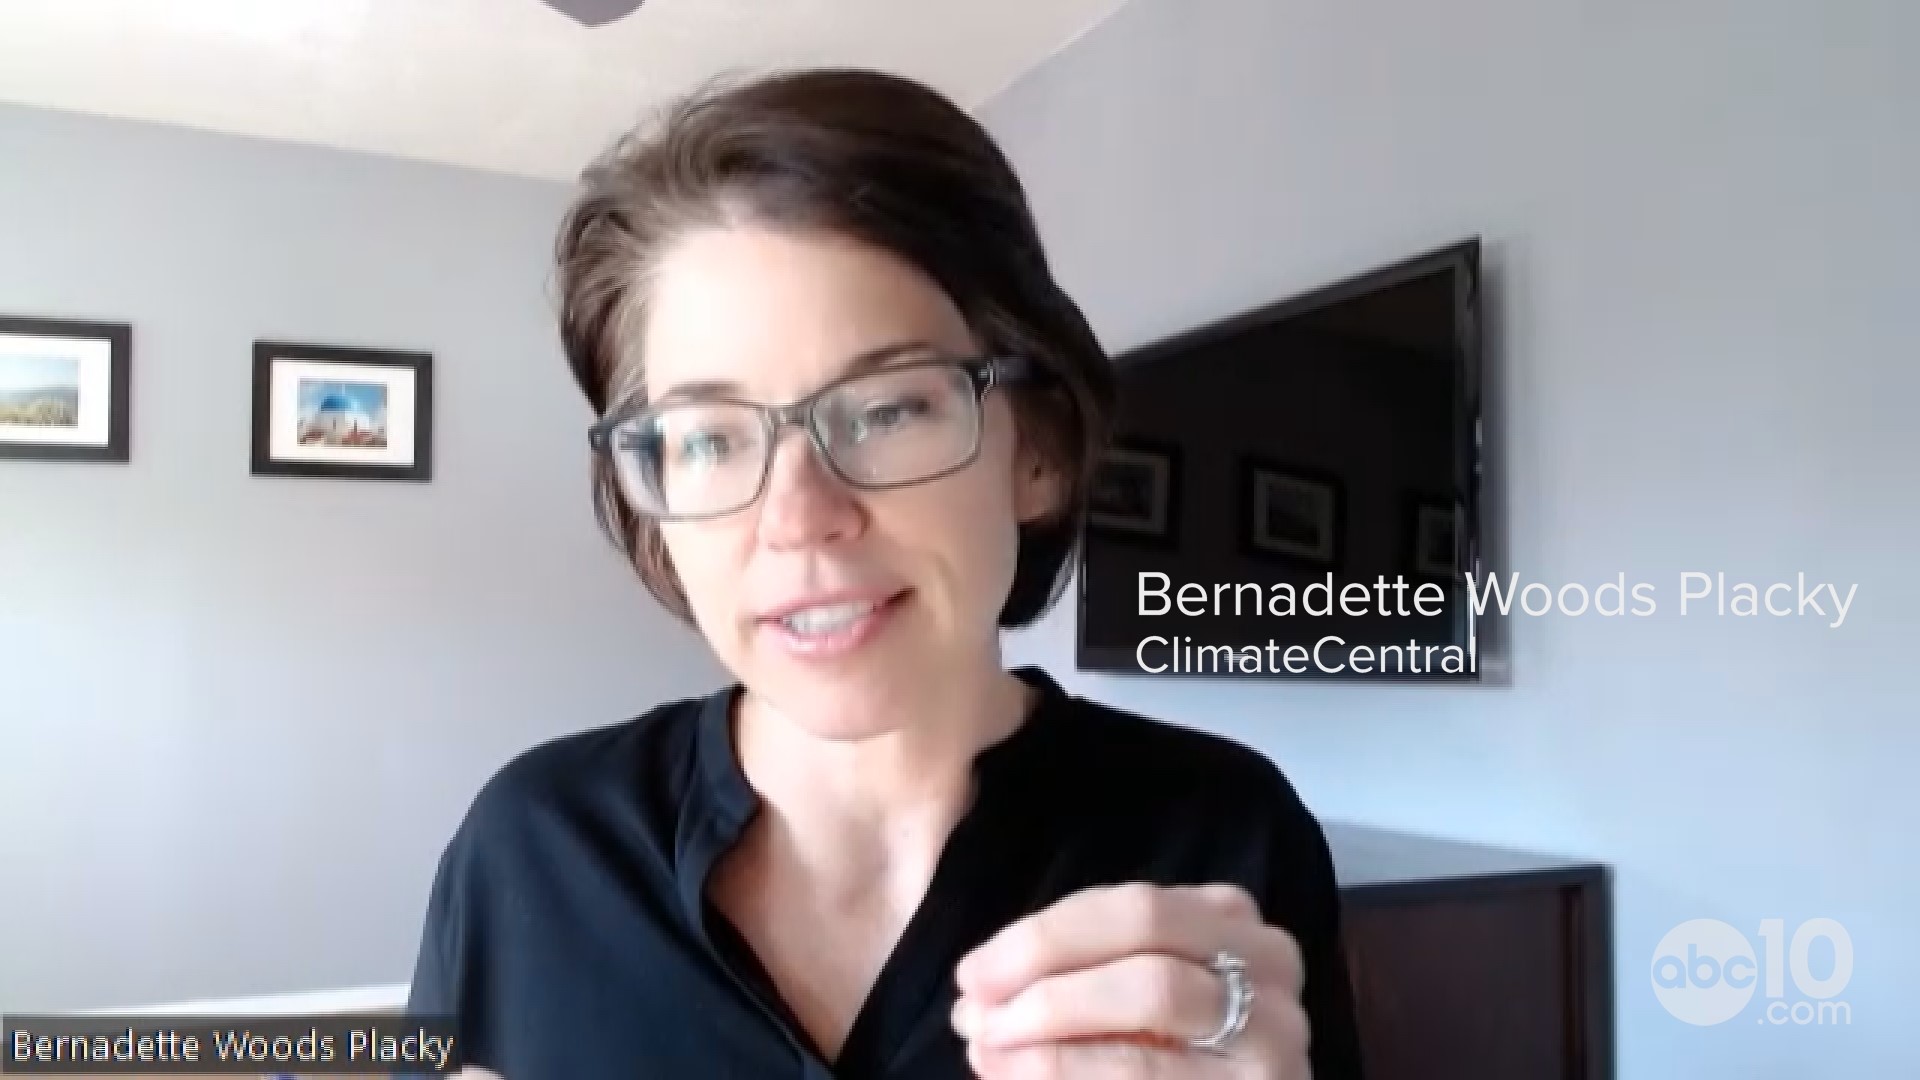 ABC10 meteorologist Brenden Mincheff talks with Bernadette Woods Placky of ClimateCentral about the takeaways following the UN climate conference.